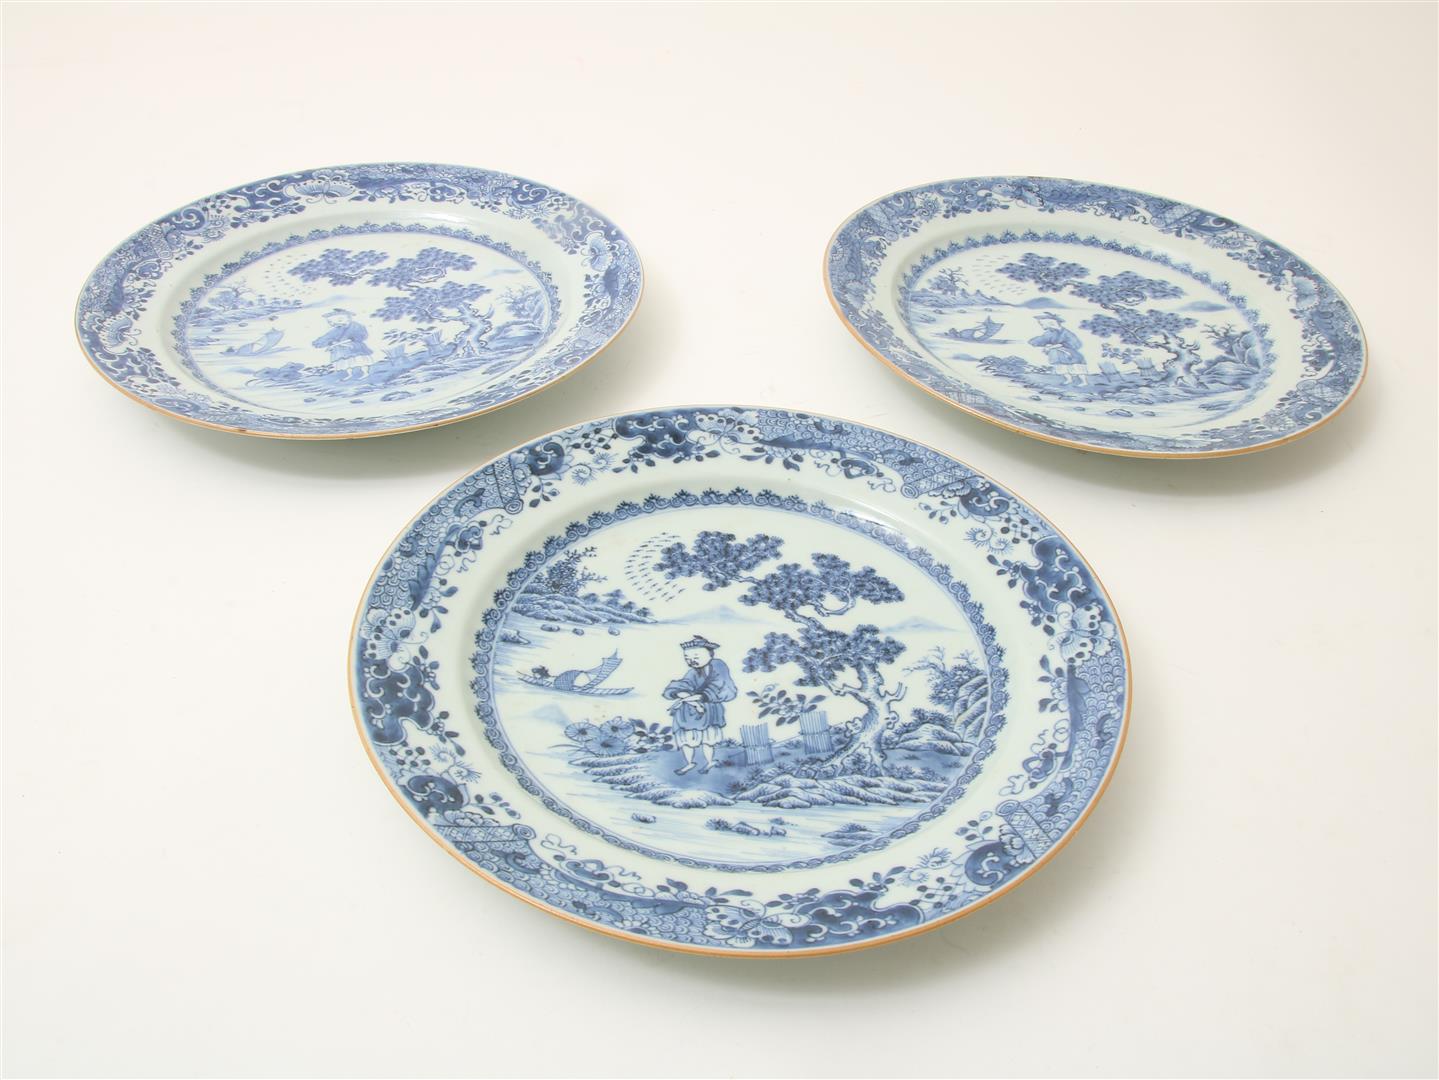 A set of 3 porcelain dishes decorated with a figure next to river, China 18th century, Qianlong, - Image 4 of 6